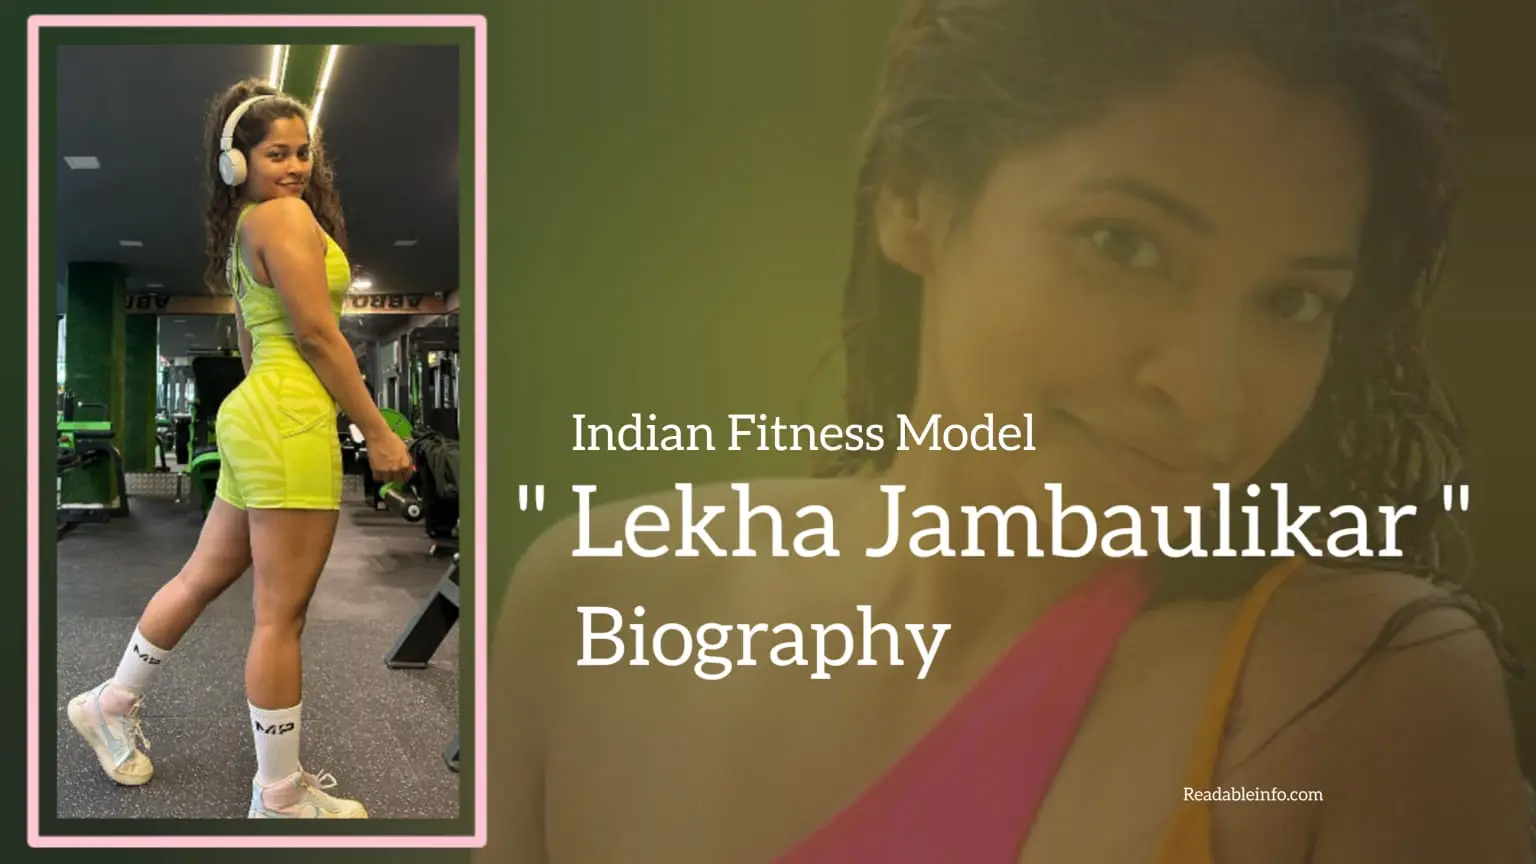 You are currently viewing Lekha Jambaulikar Biography (Indian Fitness Model)